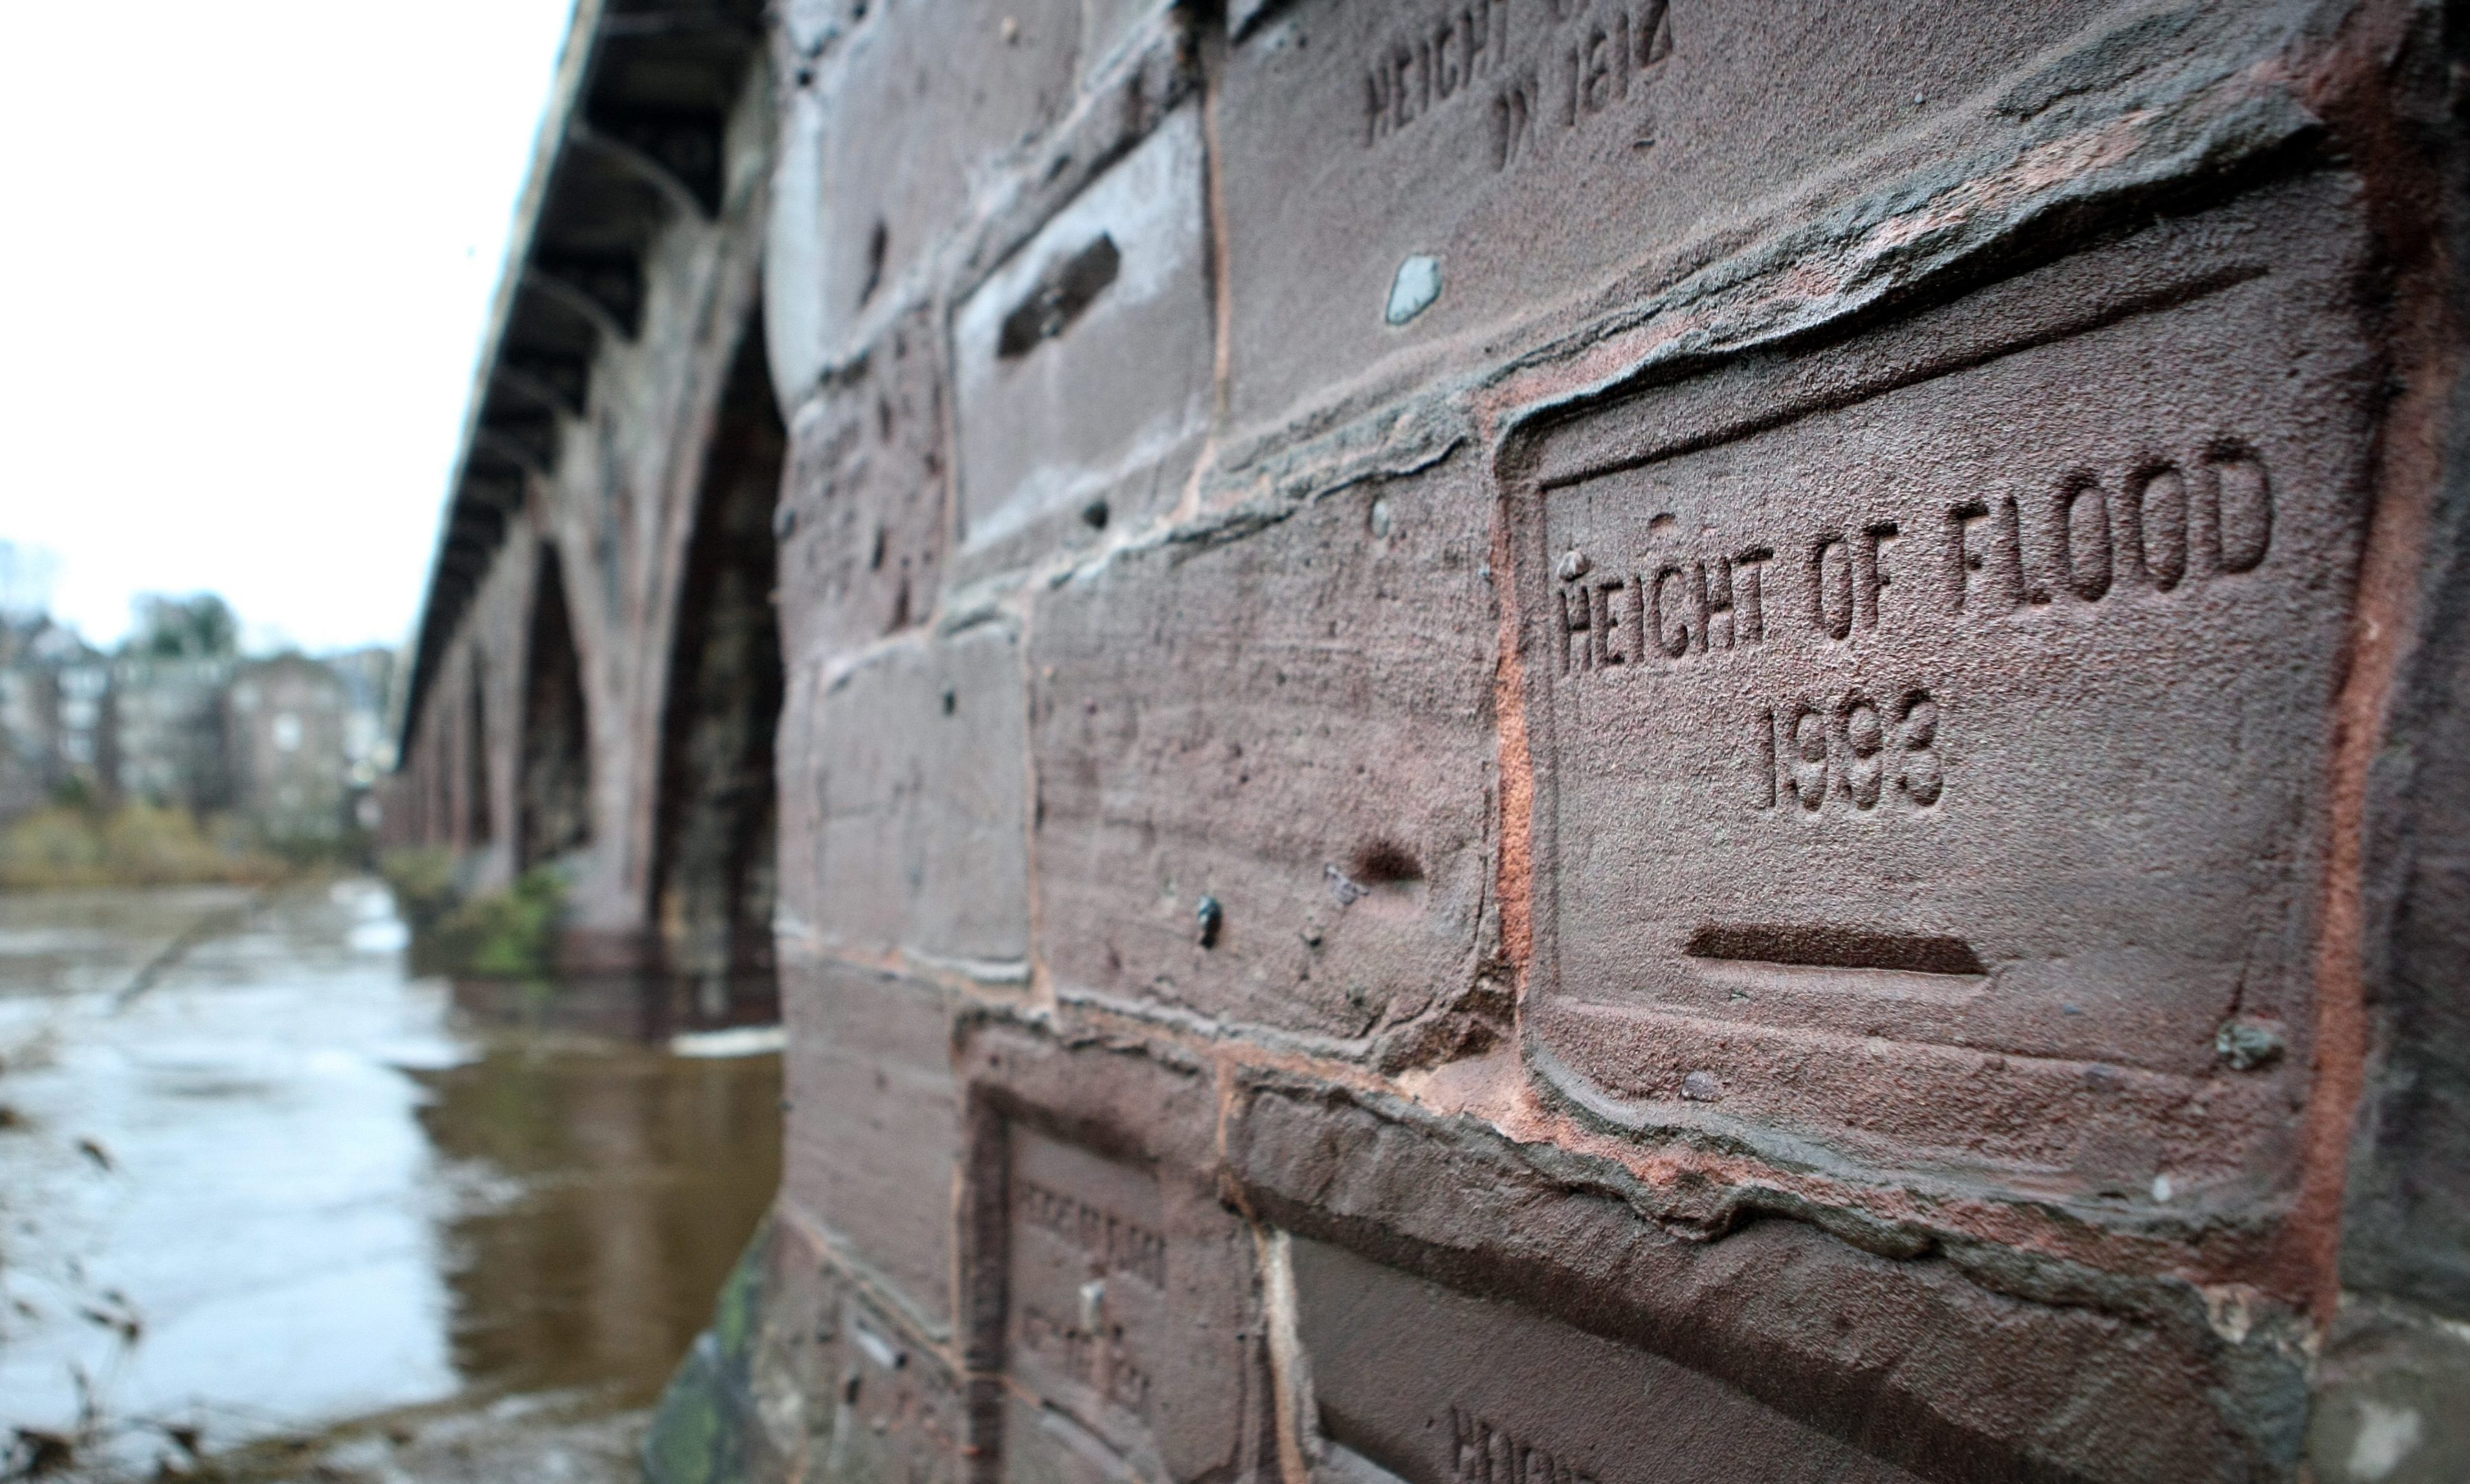 Marks on Smeatons Bridge show the height of floods the historic crossing has survived. It will undergo maintenance as part of the council programme.